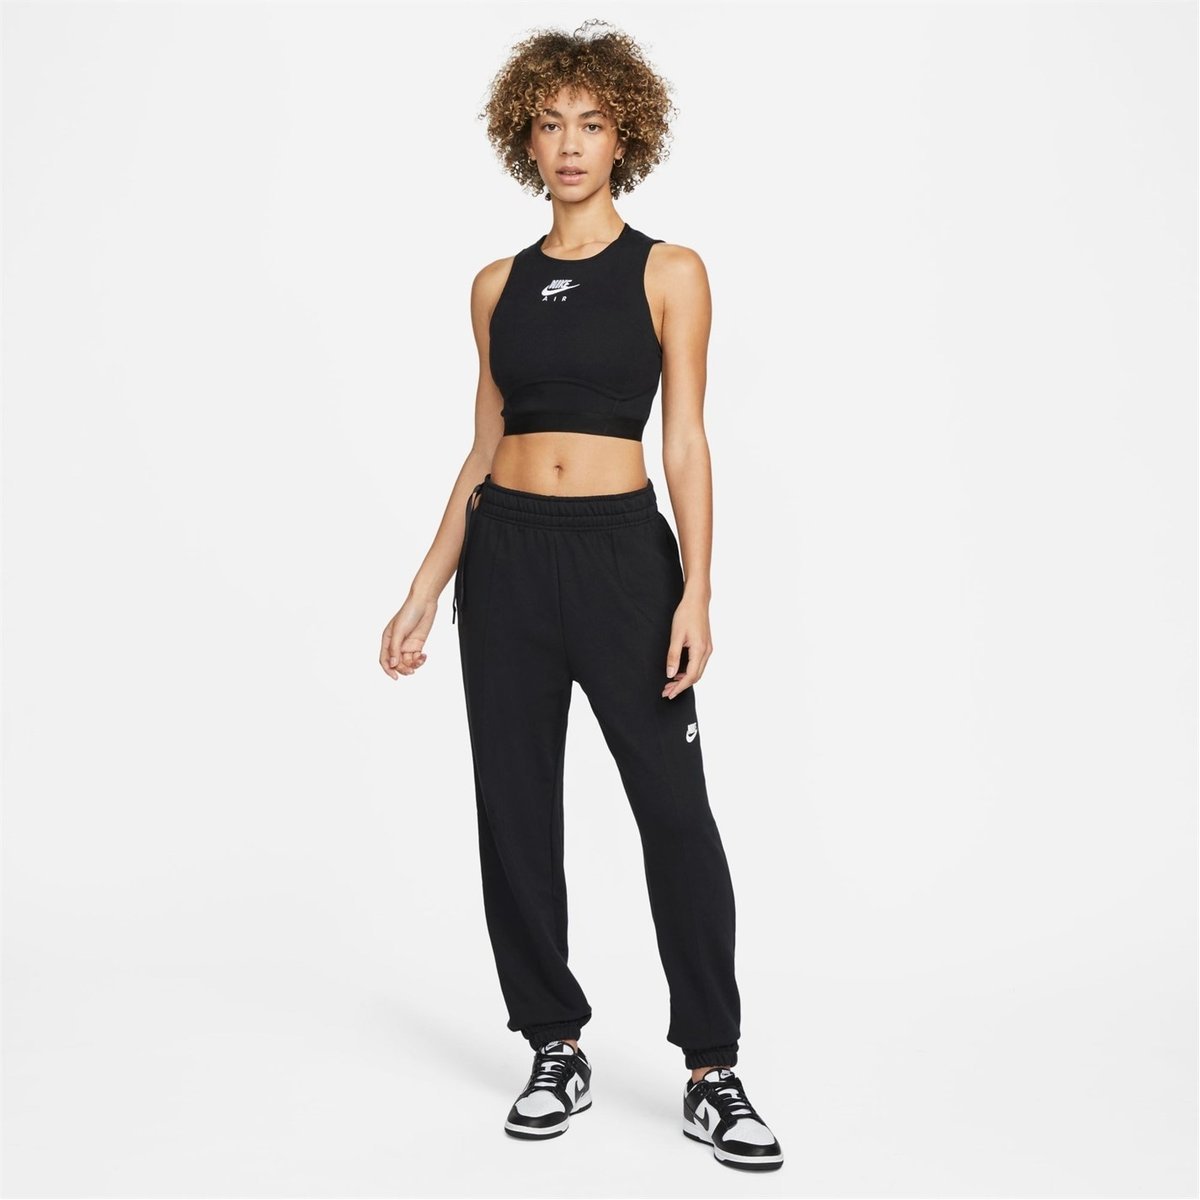 New Girls Dance Trousers & Tights. Nike BE